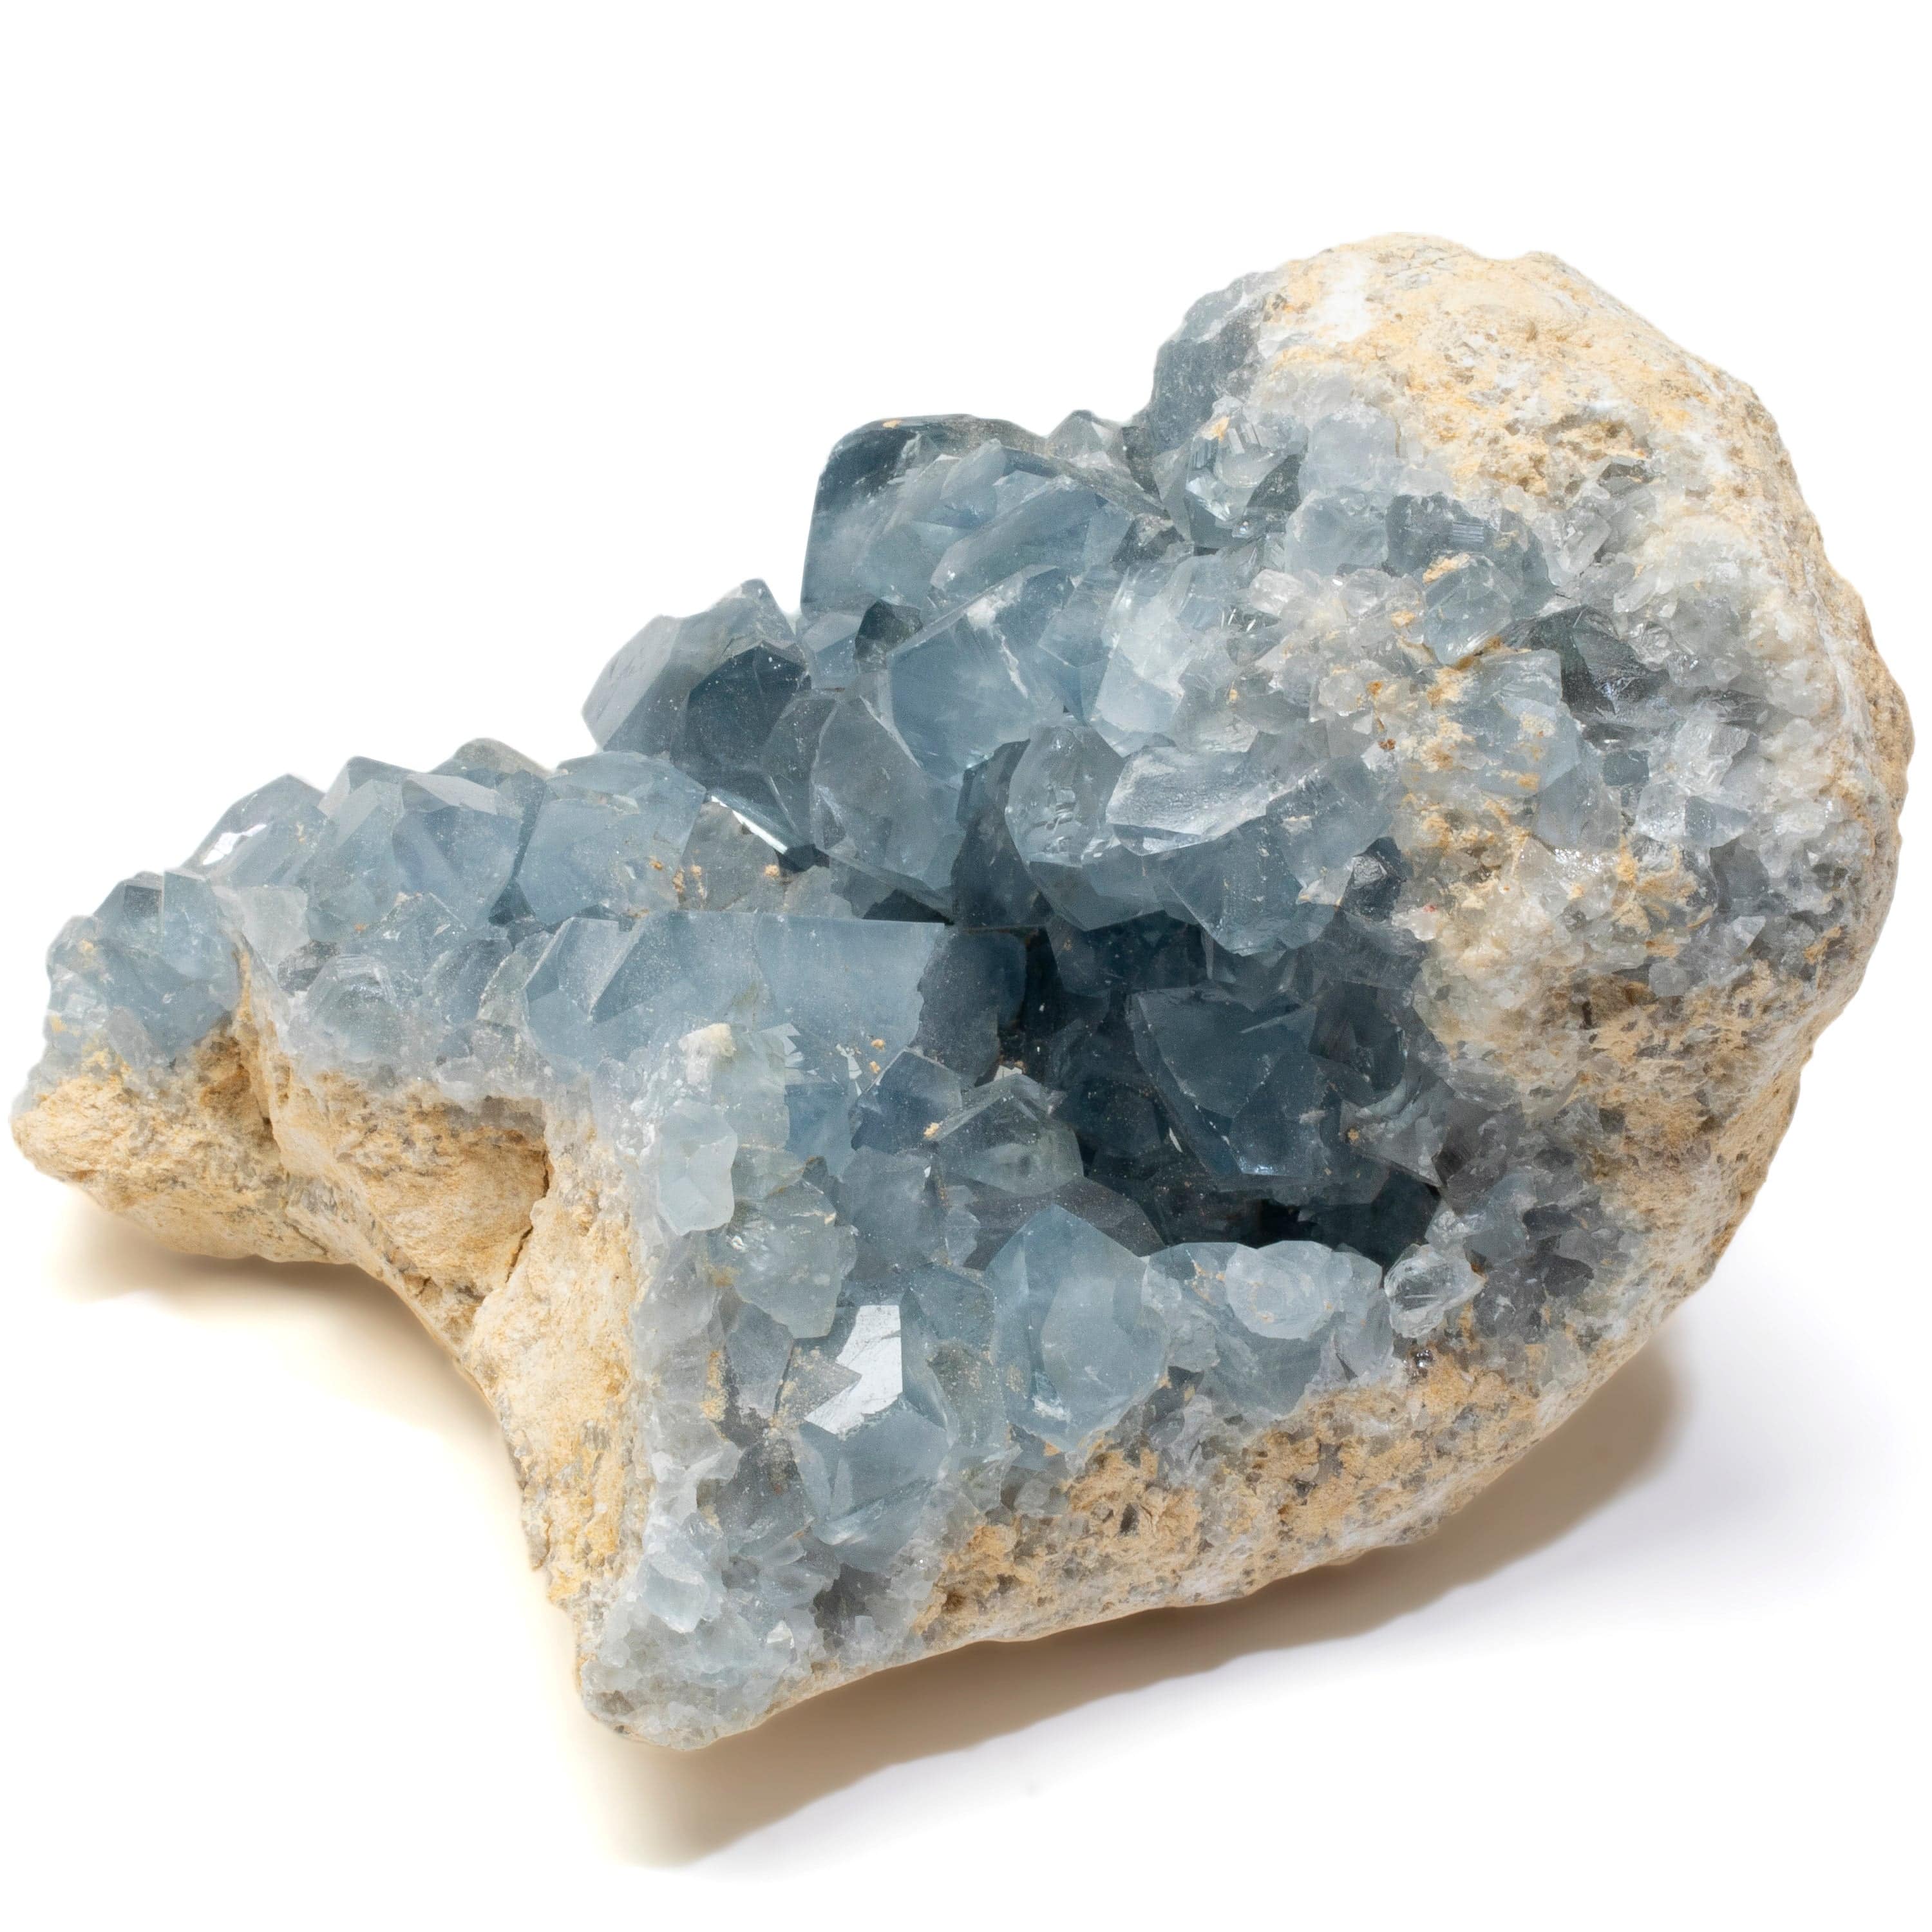 Kalifano Celestite Natural Celestite Crystal Cluster Geode from Madagascar - 8.5 in. CG1500.003